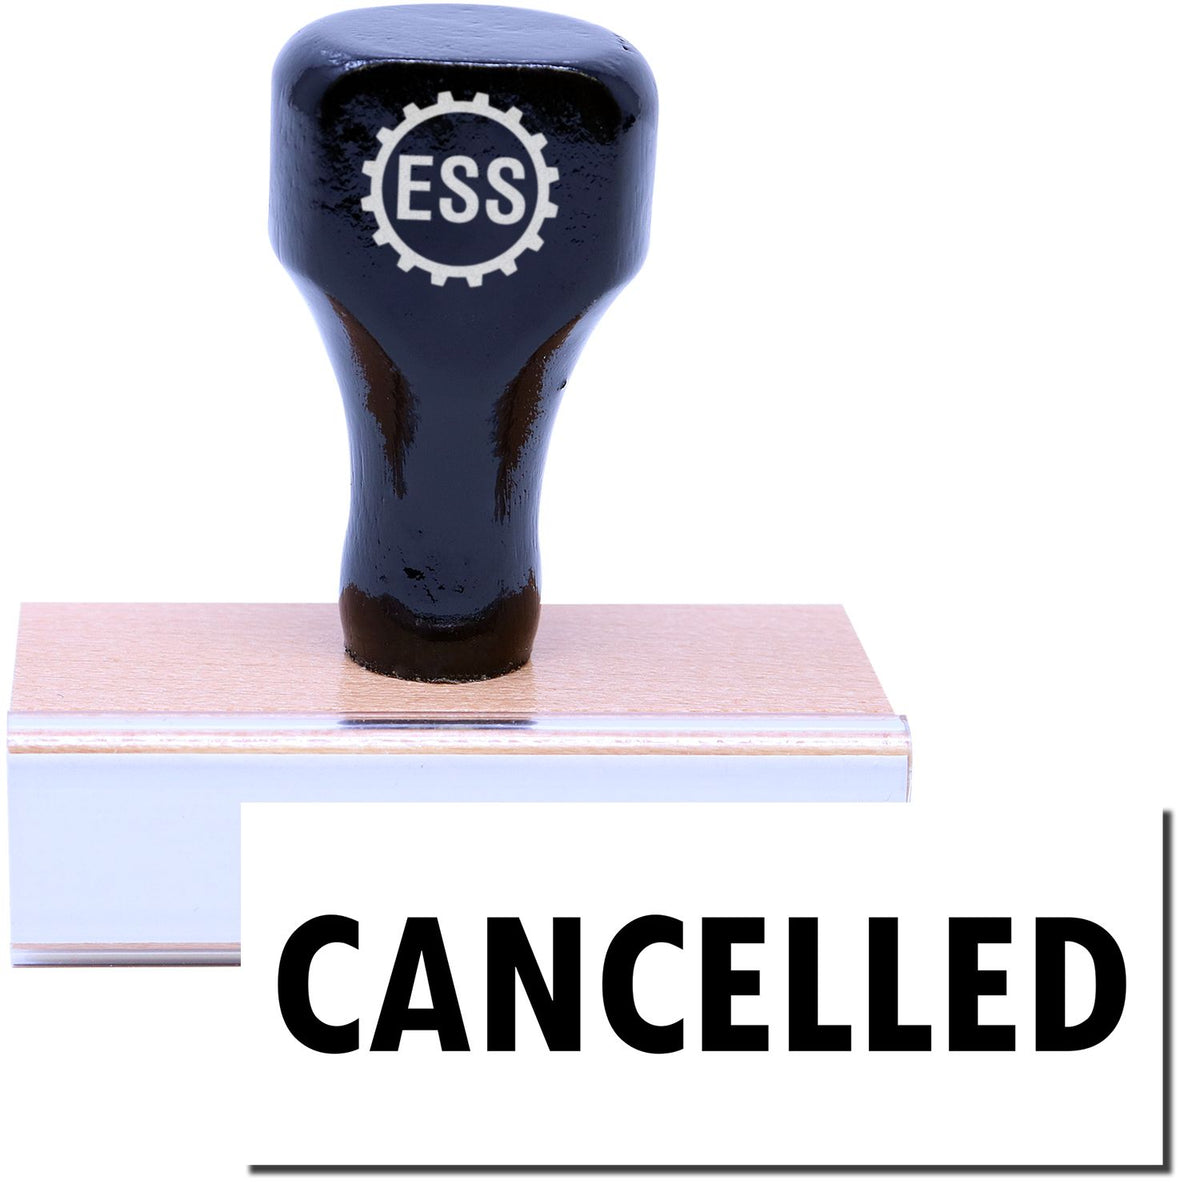 A stock office rubber stamp with a stamped image showing how the text &quot;CANCELLED&quot; in a large font is displayed after stamping.